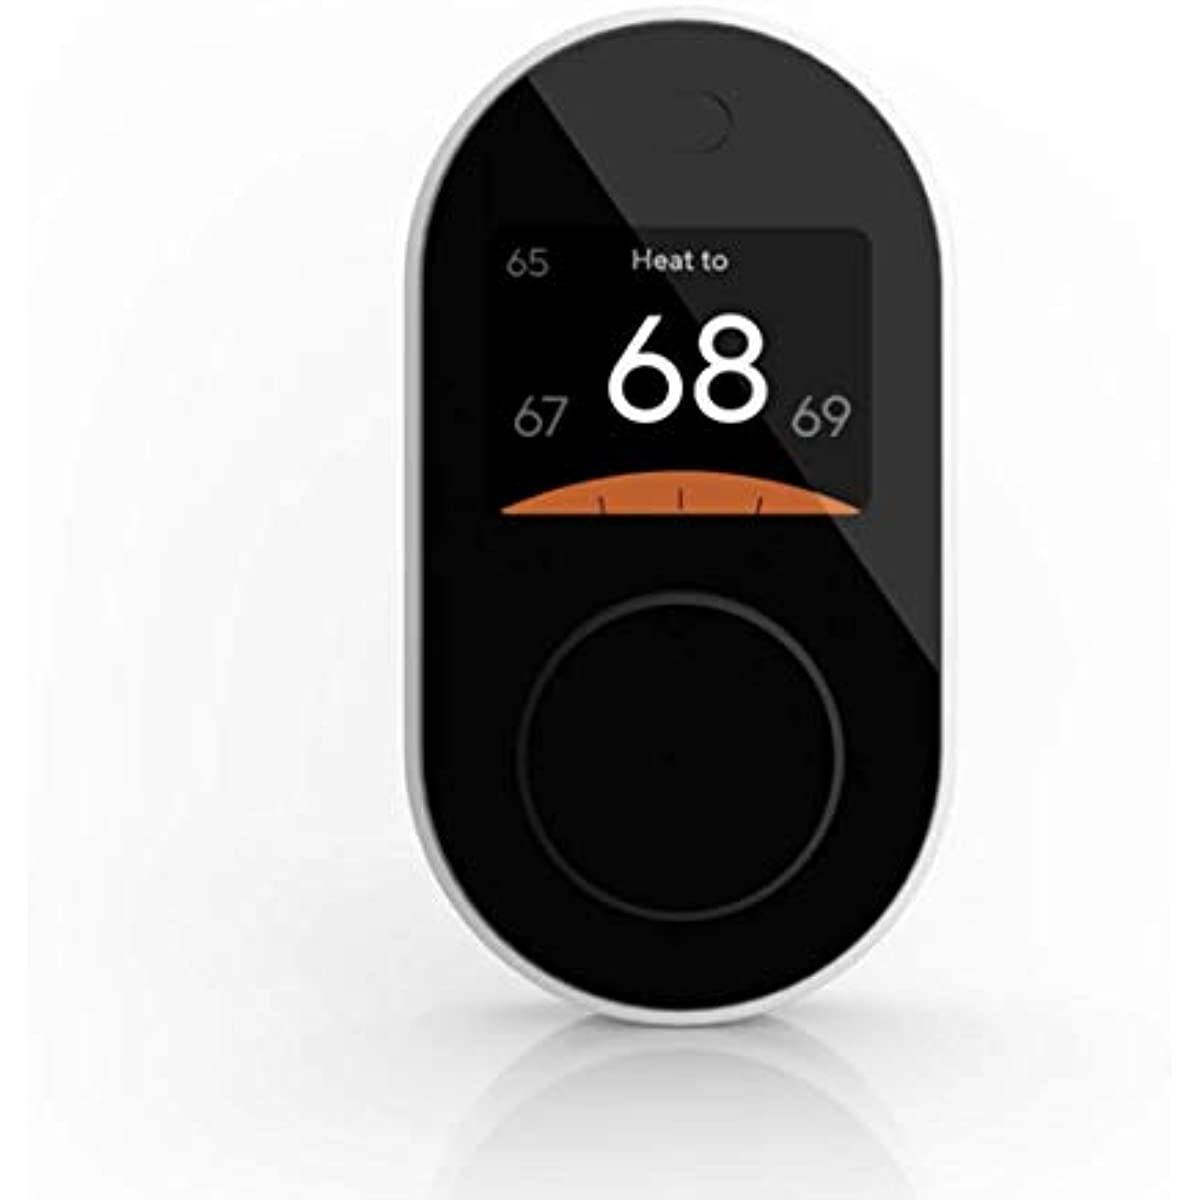 

Programmable Smart WiFi Thermostat for Home with App Control, Energy Saving, Easy Installation, Works with Alexa and Google Assistant, Black